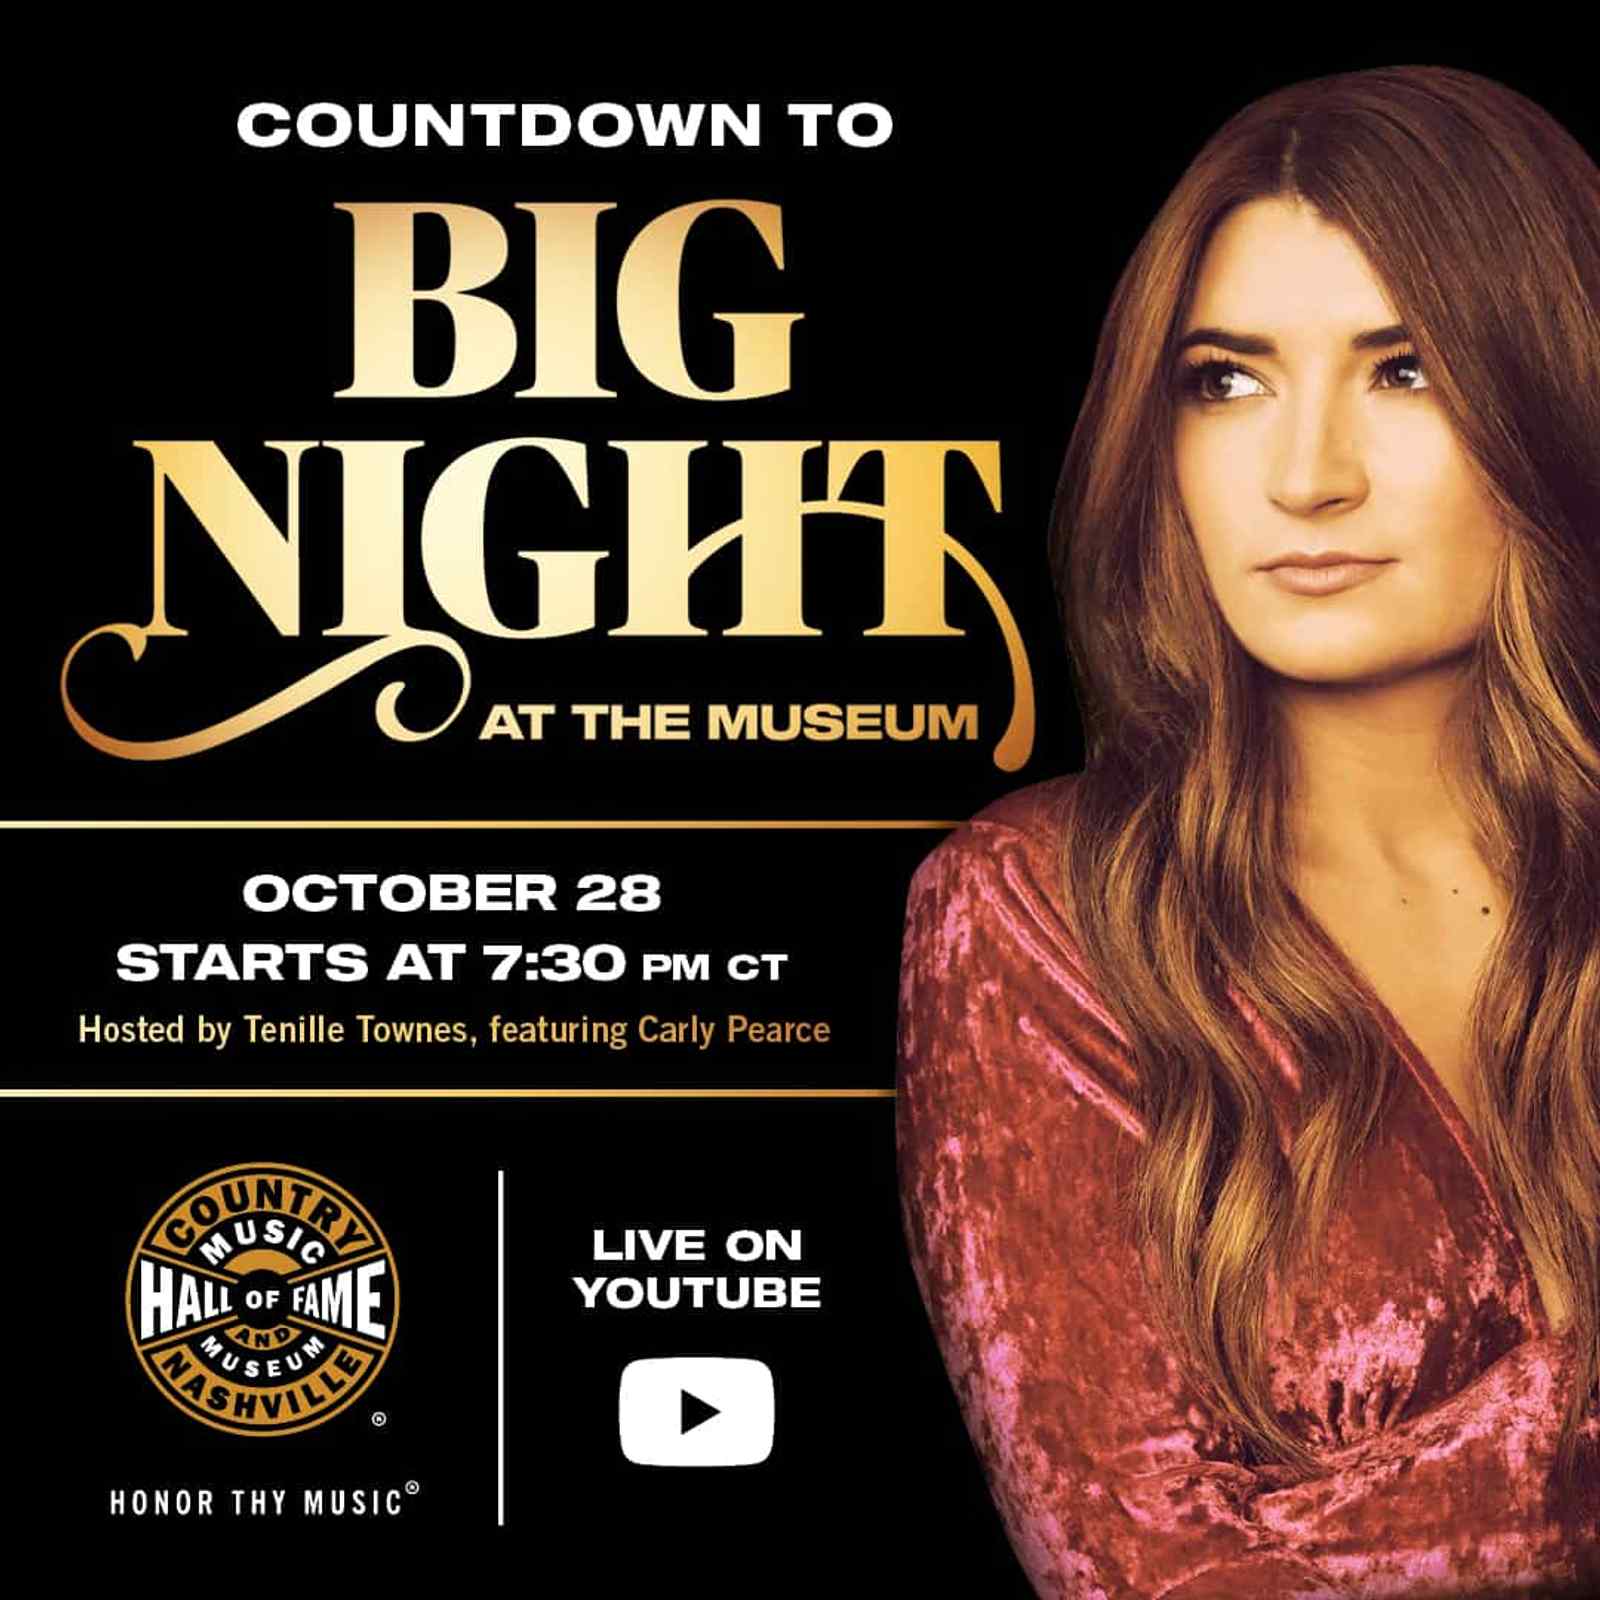 Countdown to Big Night (At the Museum): Tenille Townes and Carly Pearce